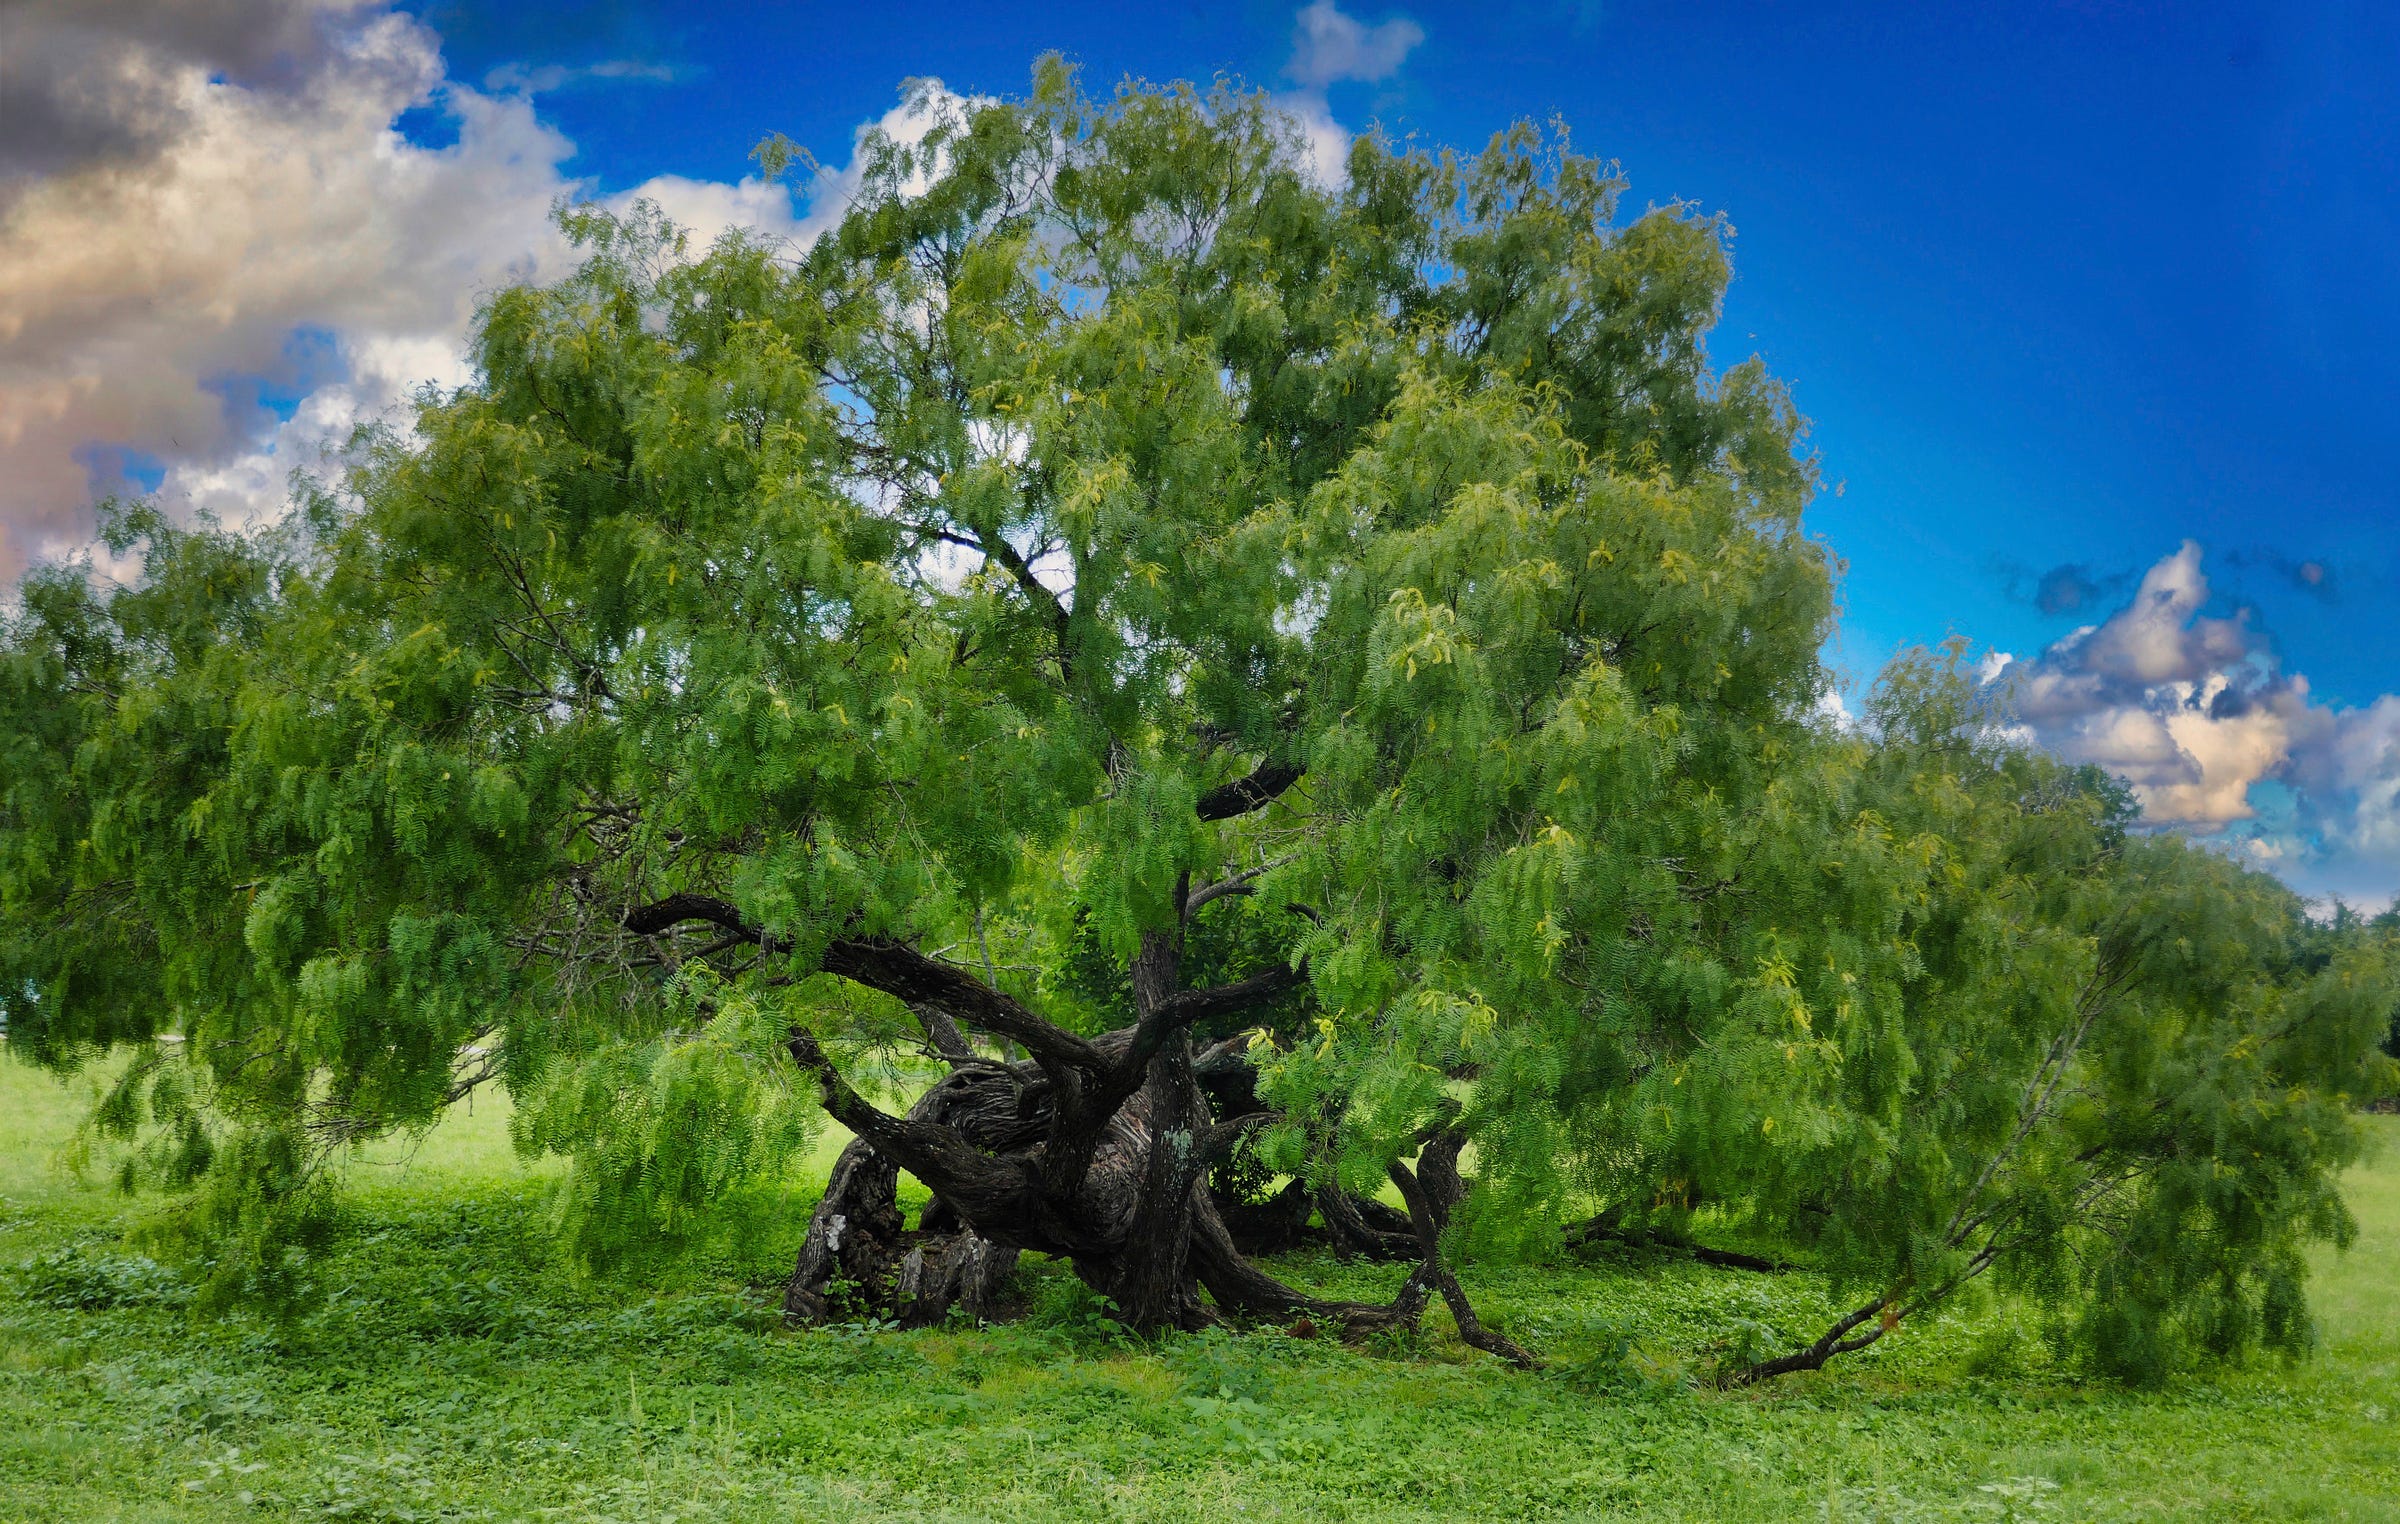 A large tree with branchesa nd trunk touching the groundwith leaves that seem to be dancing in the wind against the same green of the field with a blue sky and clouds in the background.